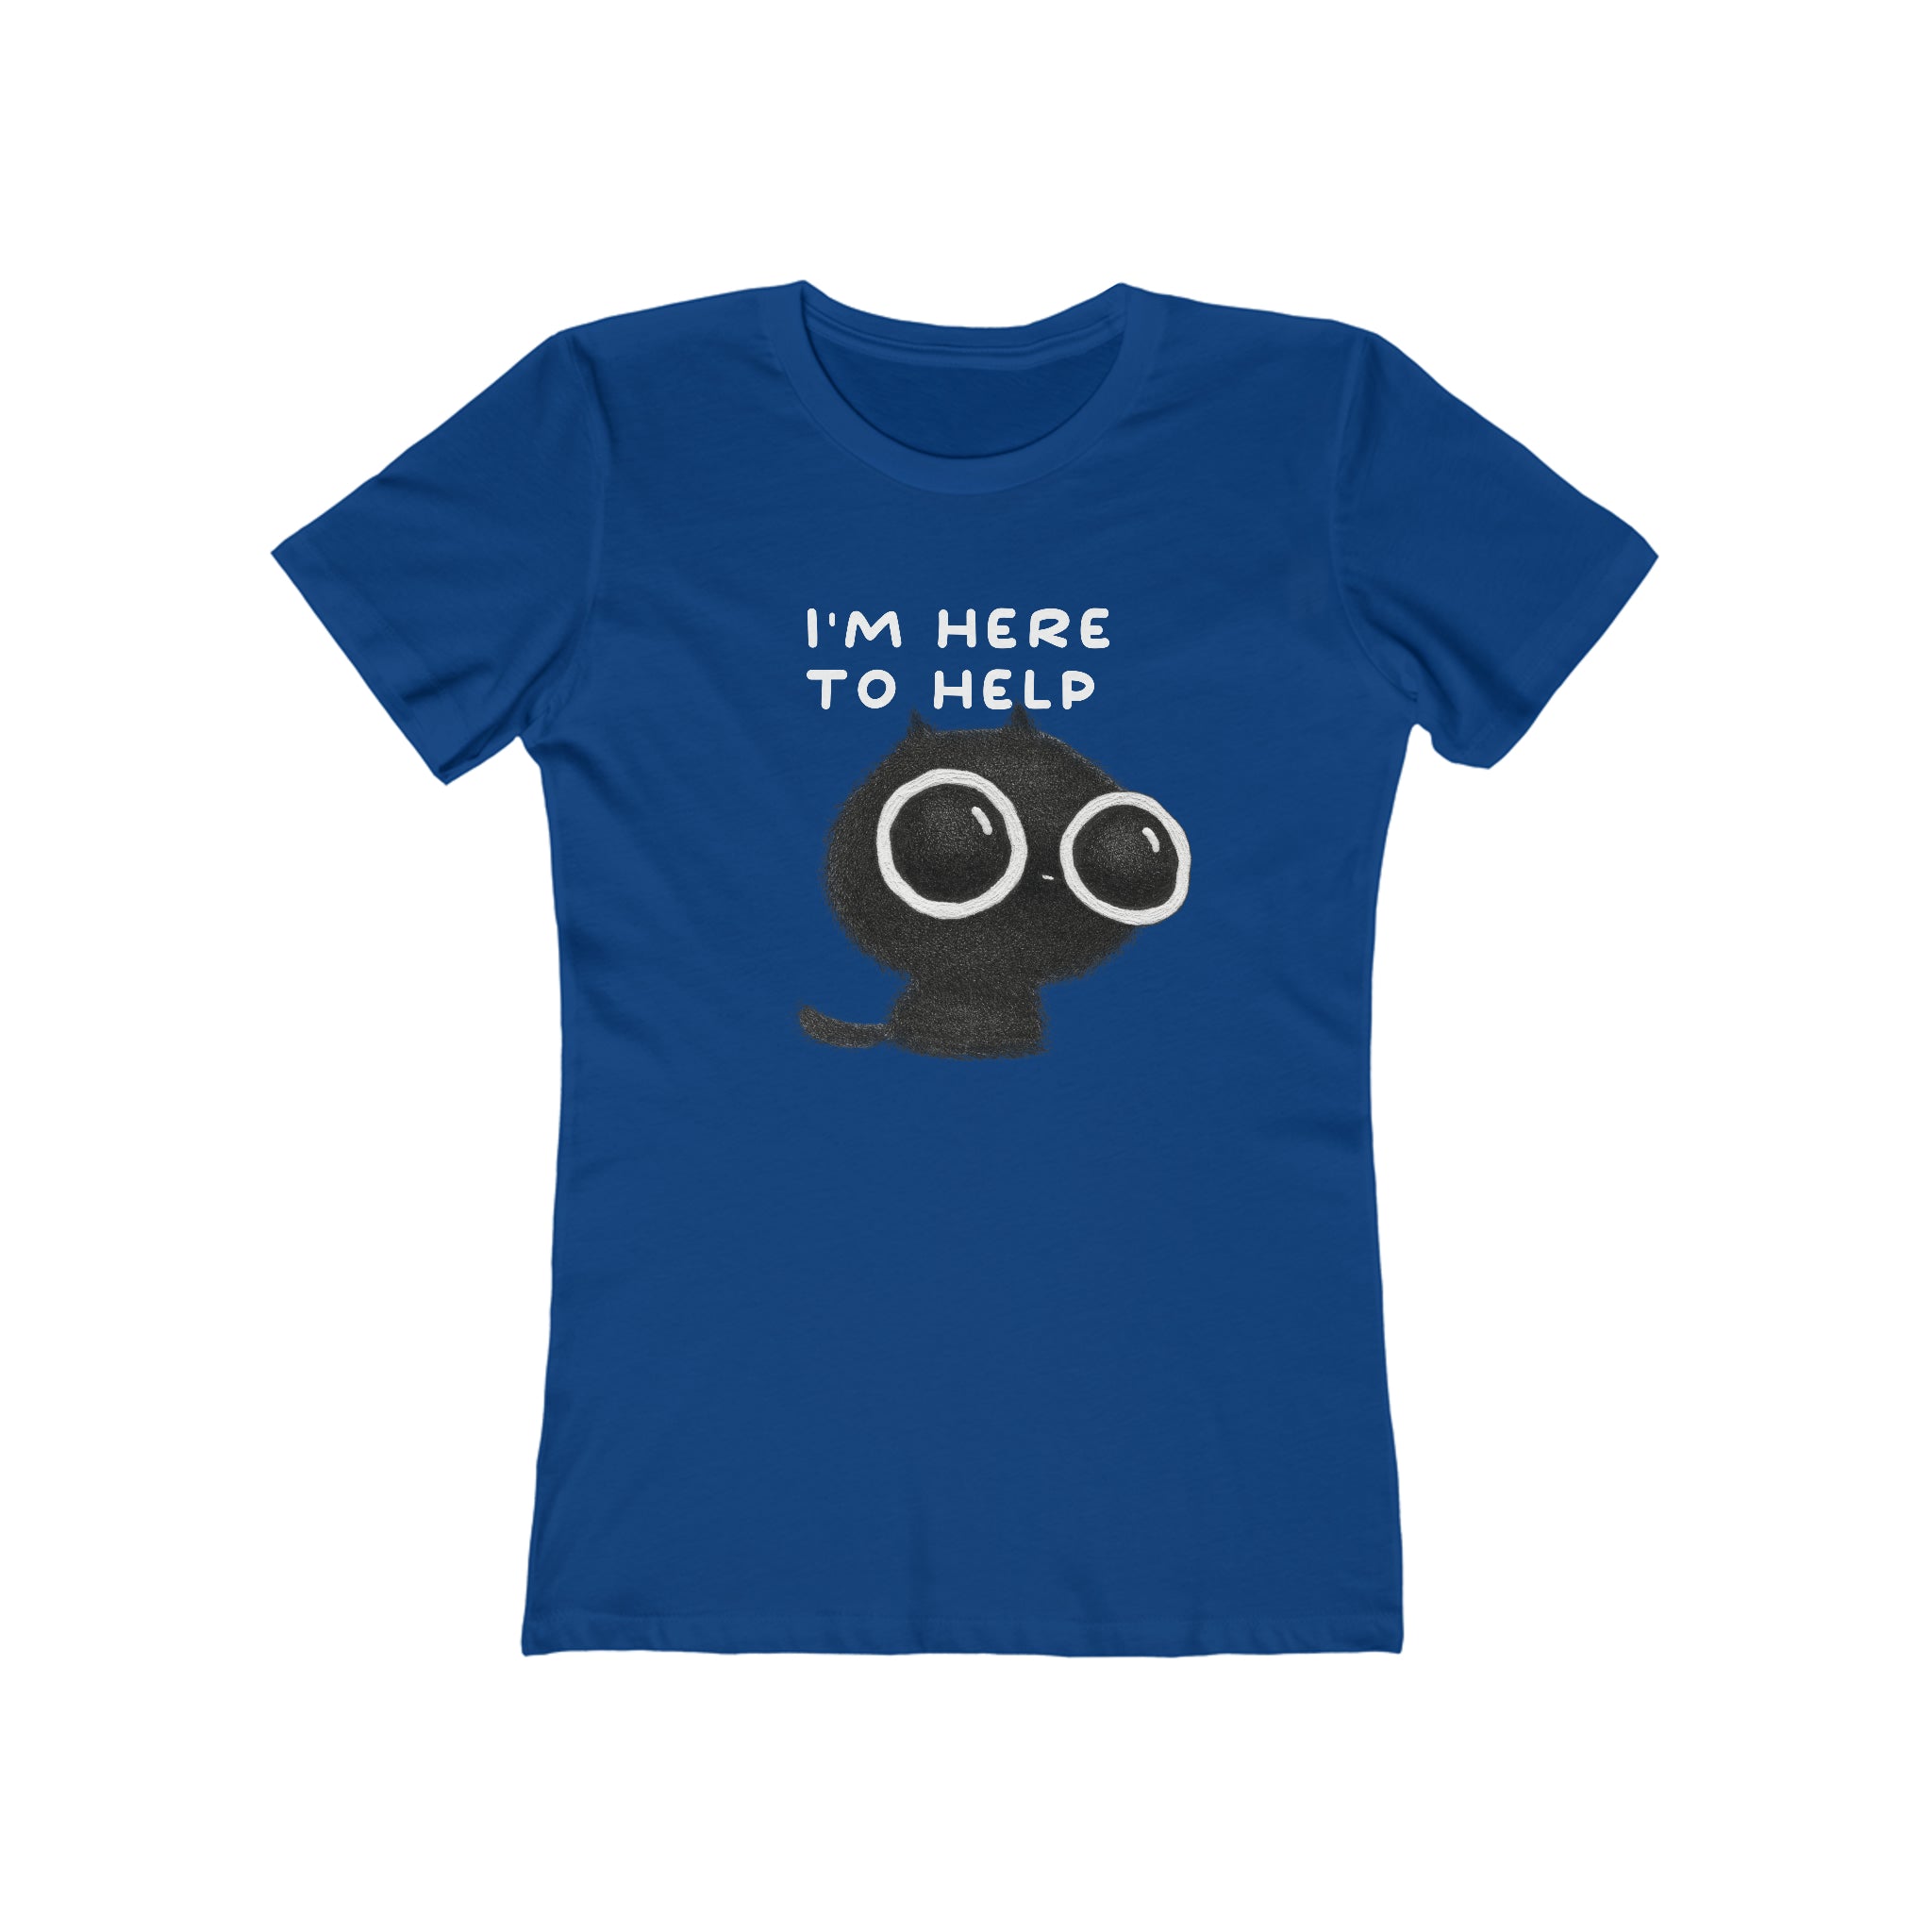 I'm Here to Help : Women's Cotton T-Shirt by Bella+Canvas